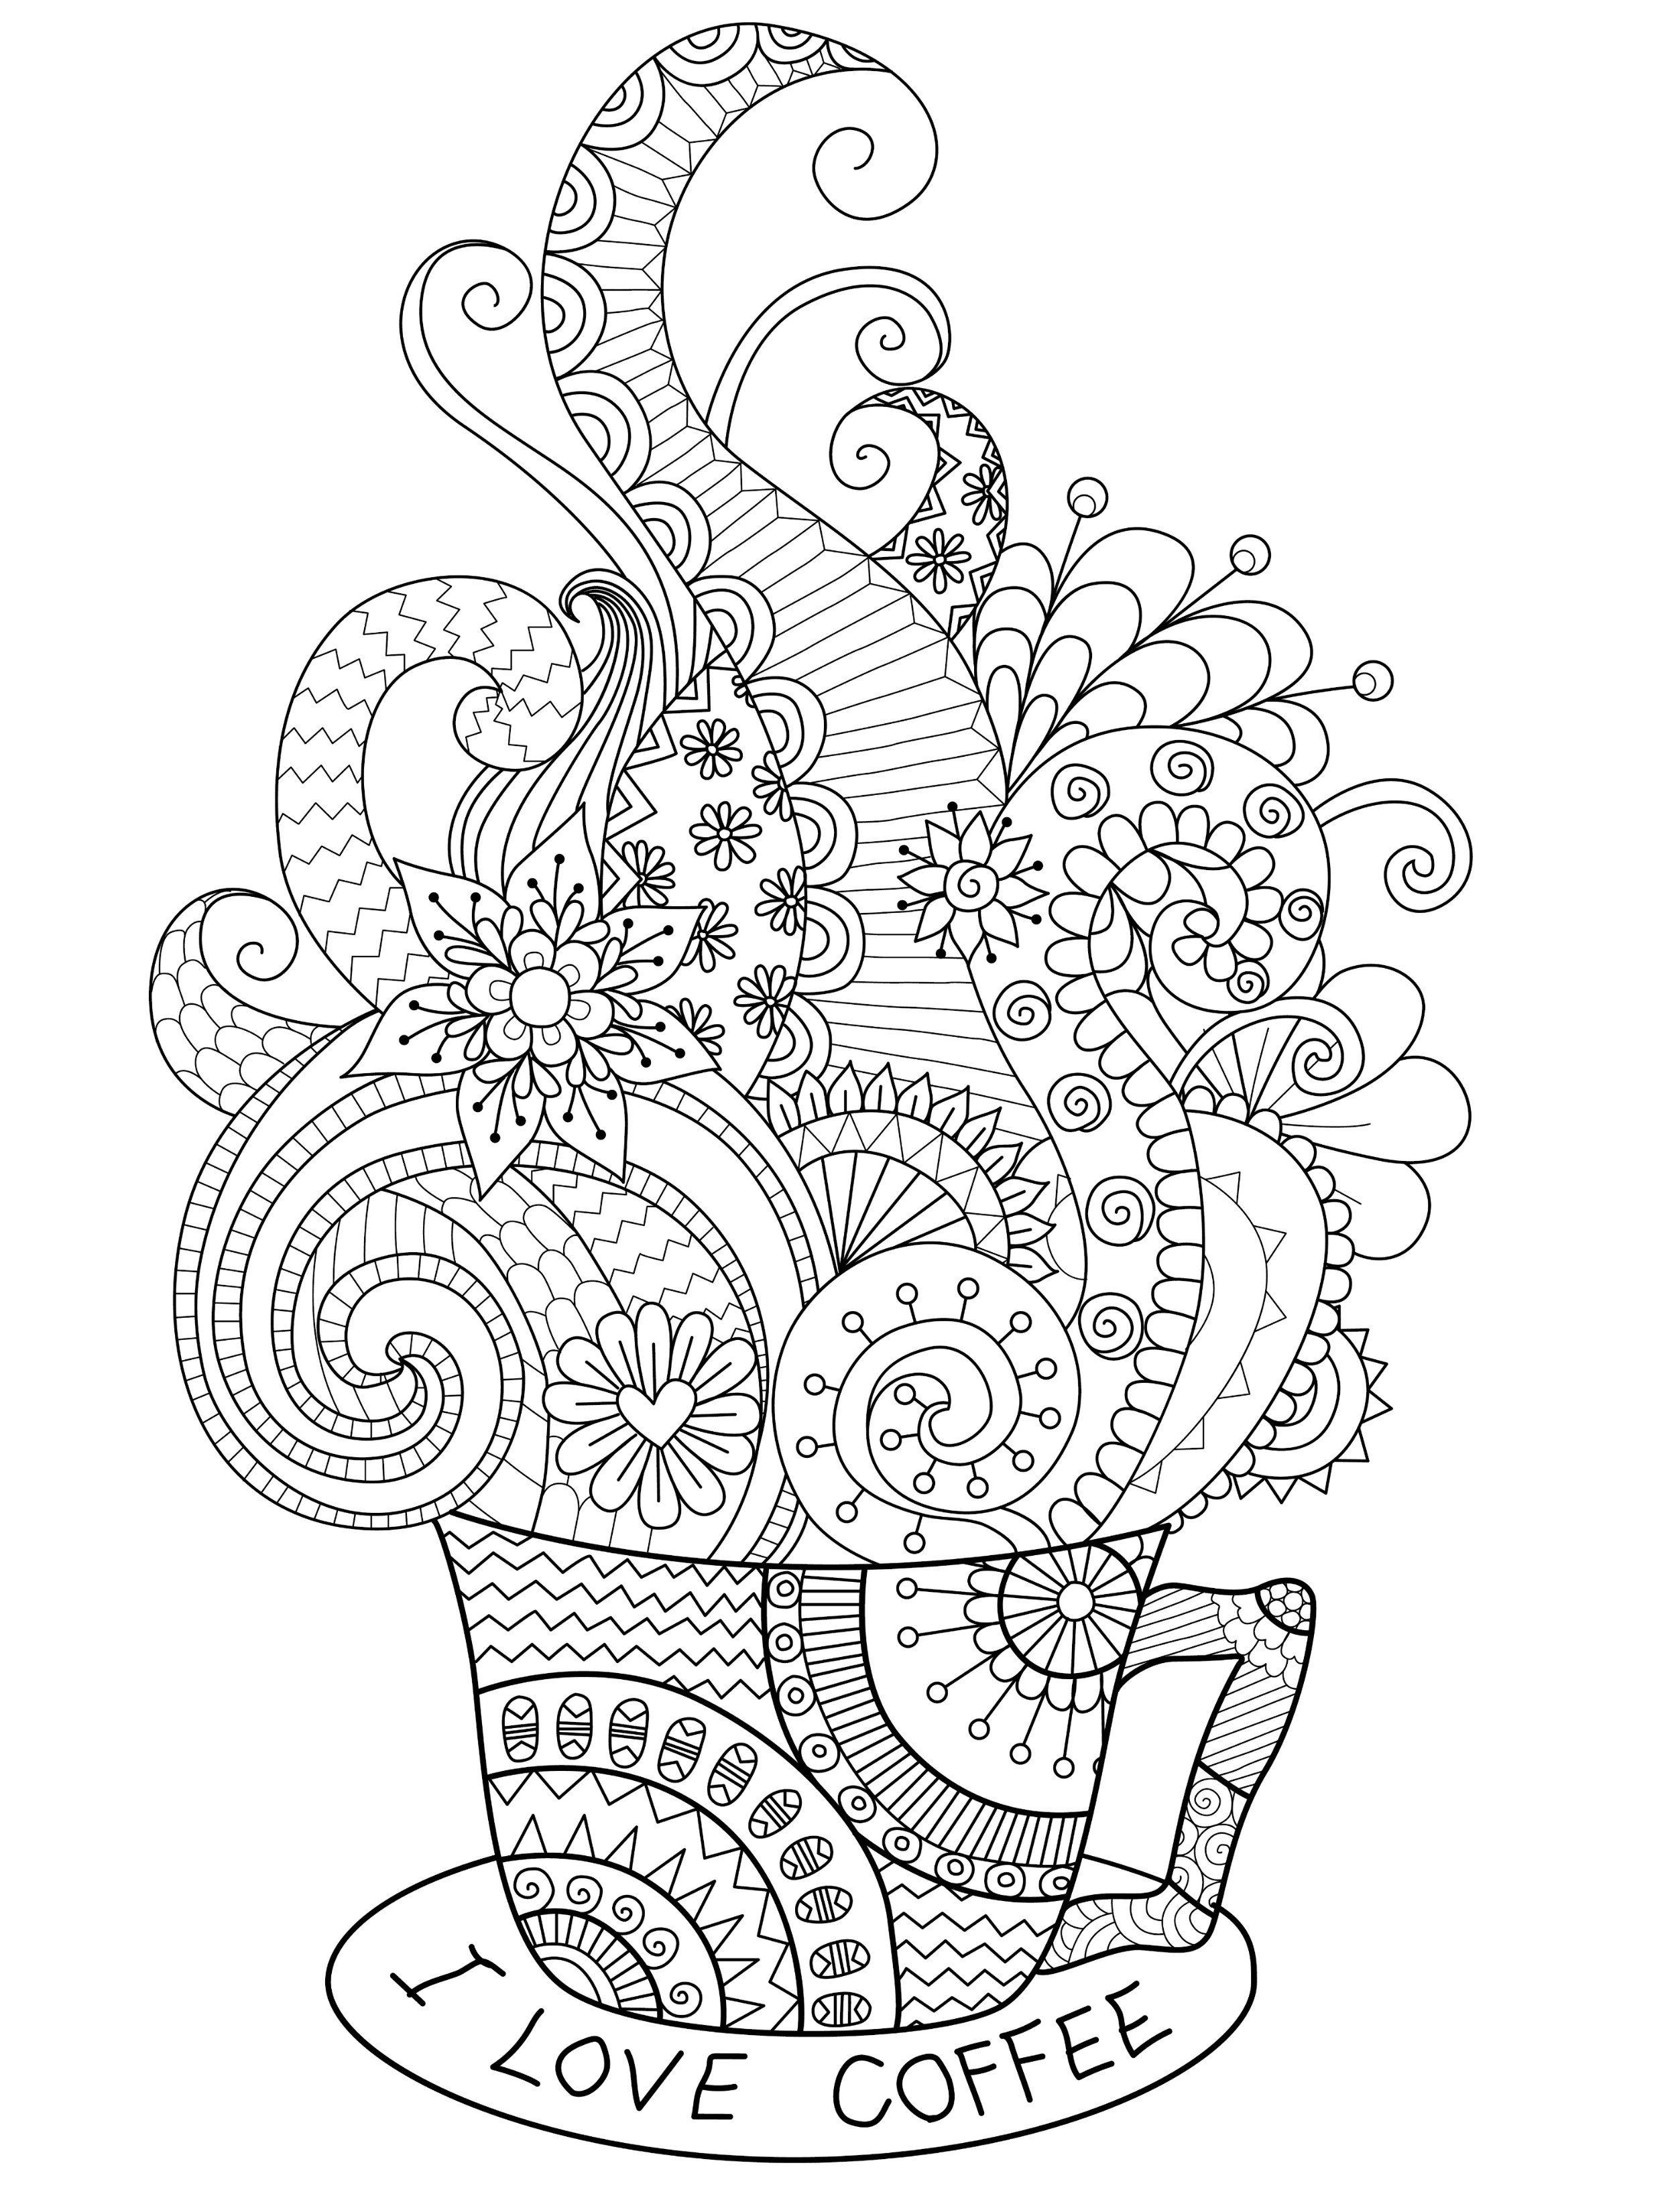 Free Printable Love Coloring Pages For Adults
 20 Gorgeous Free Printable Adult Coloring Pages Page 10